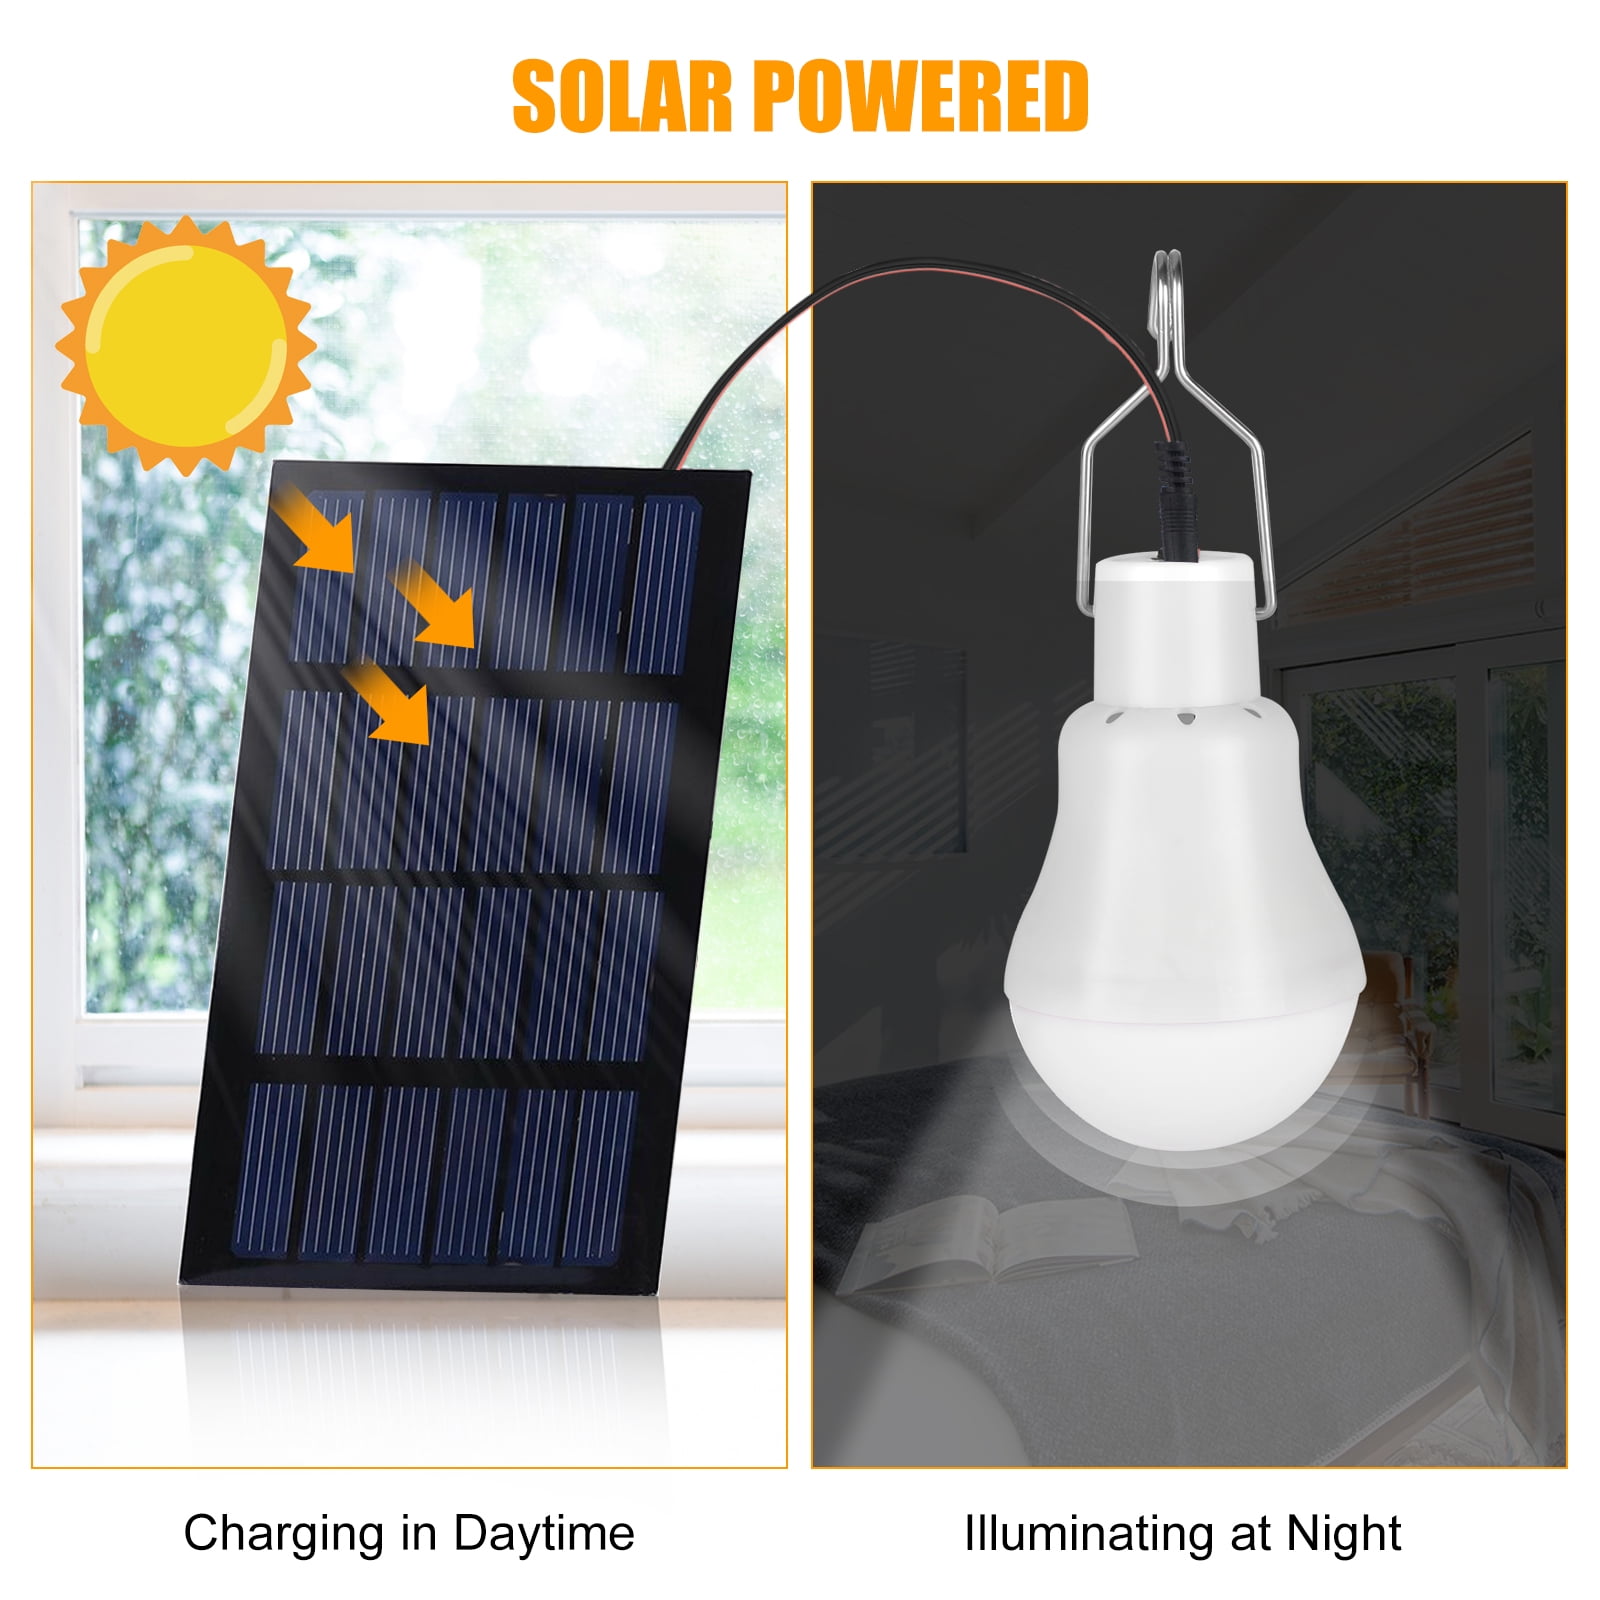 15W Bulb Outdoor & Indoor Solar Powered LED Lighting System Solar Panel HOT 